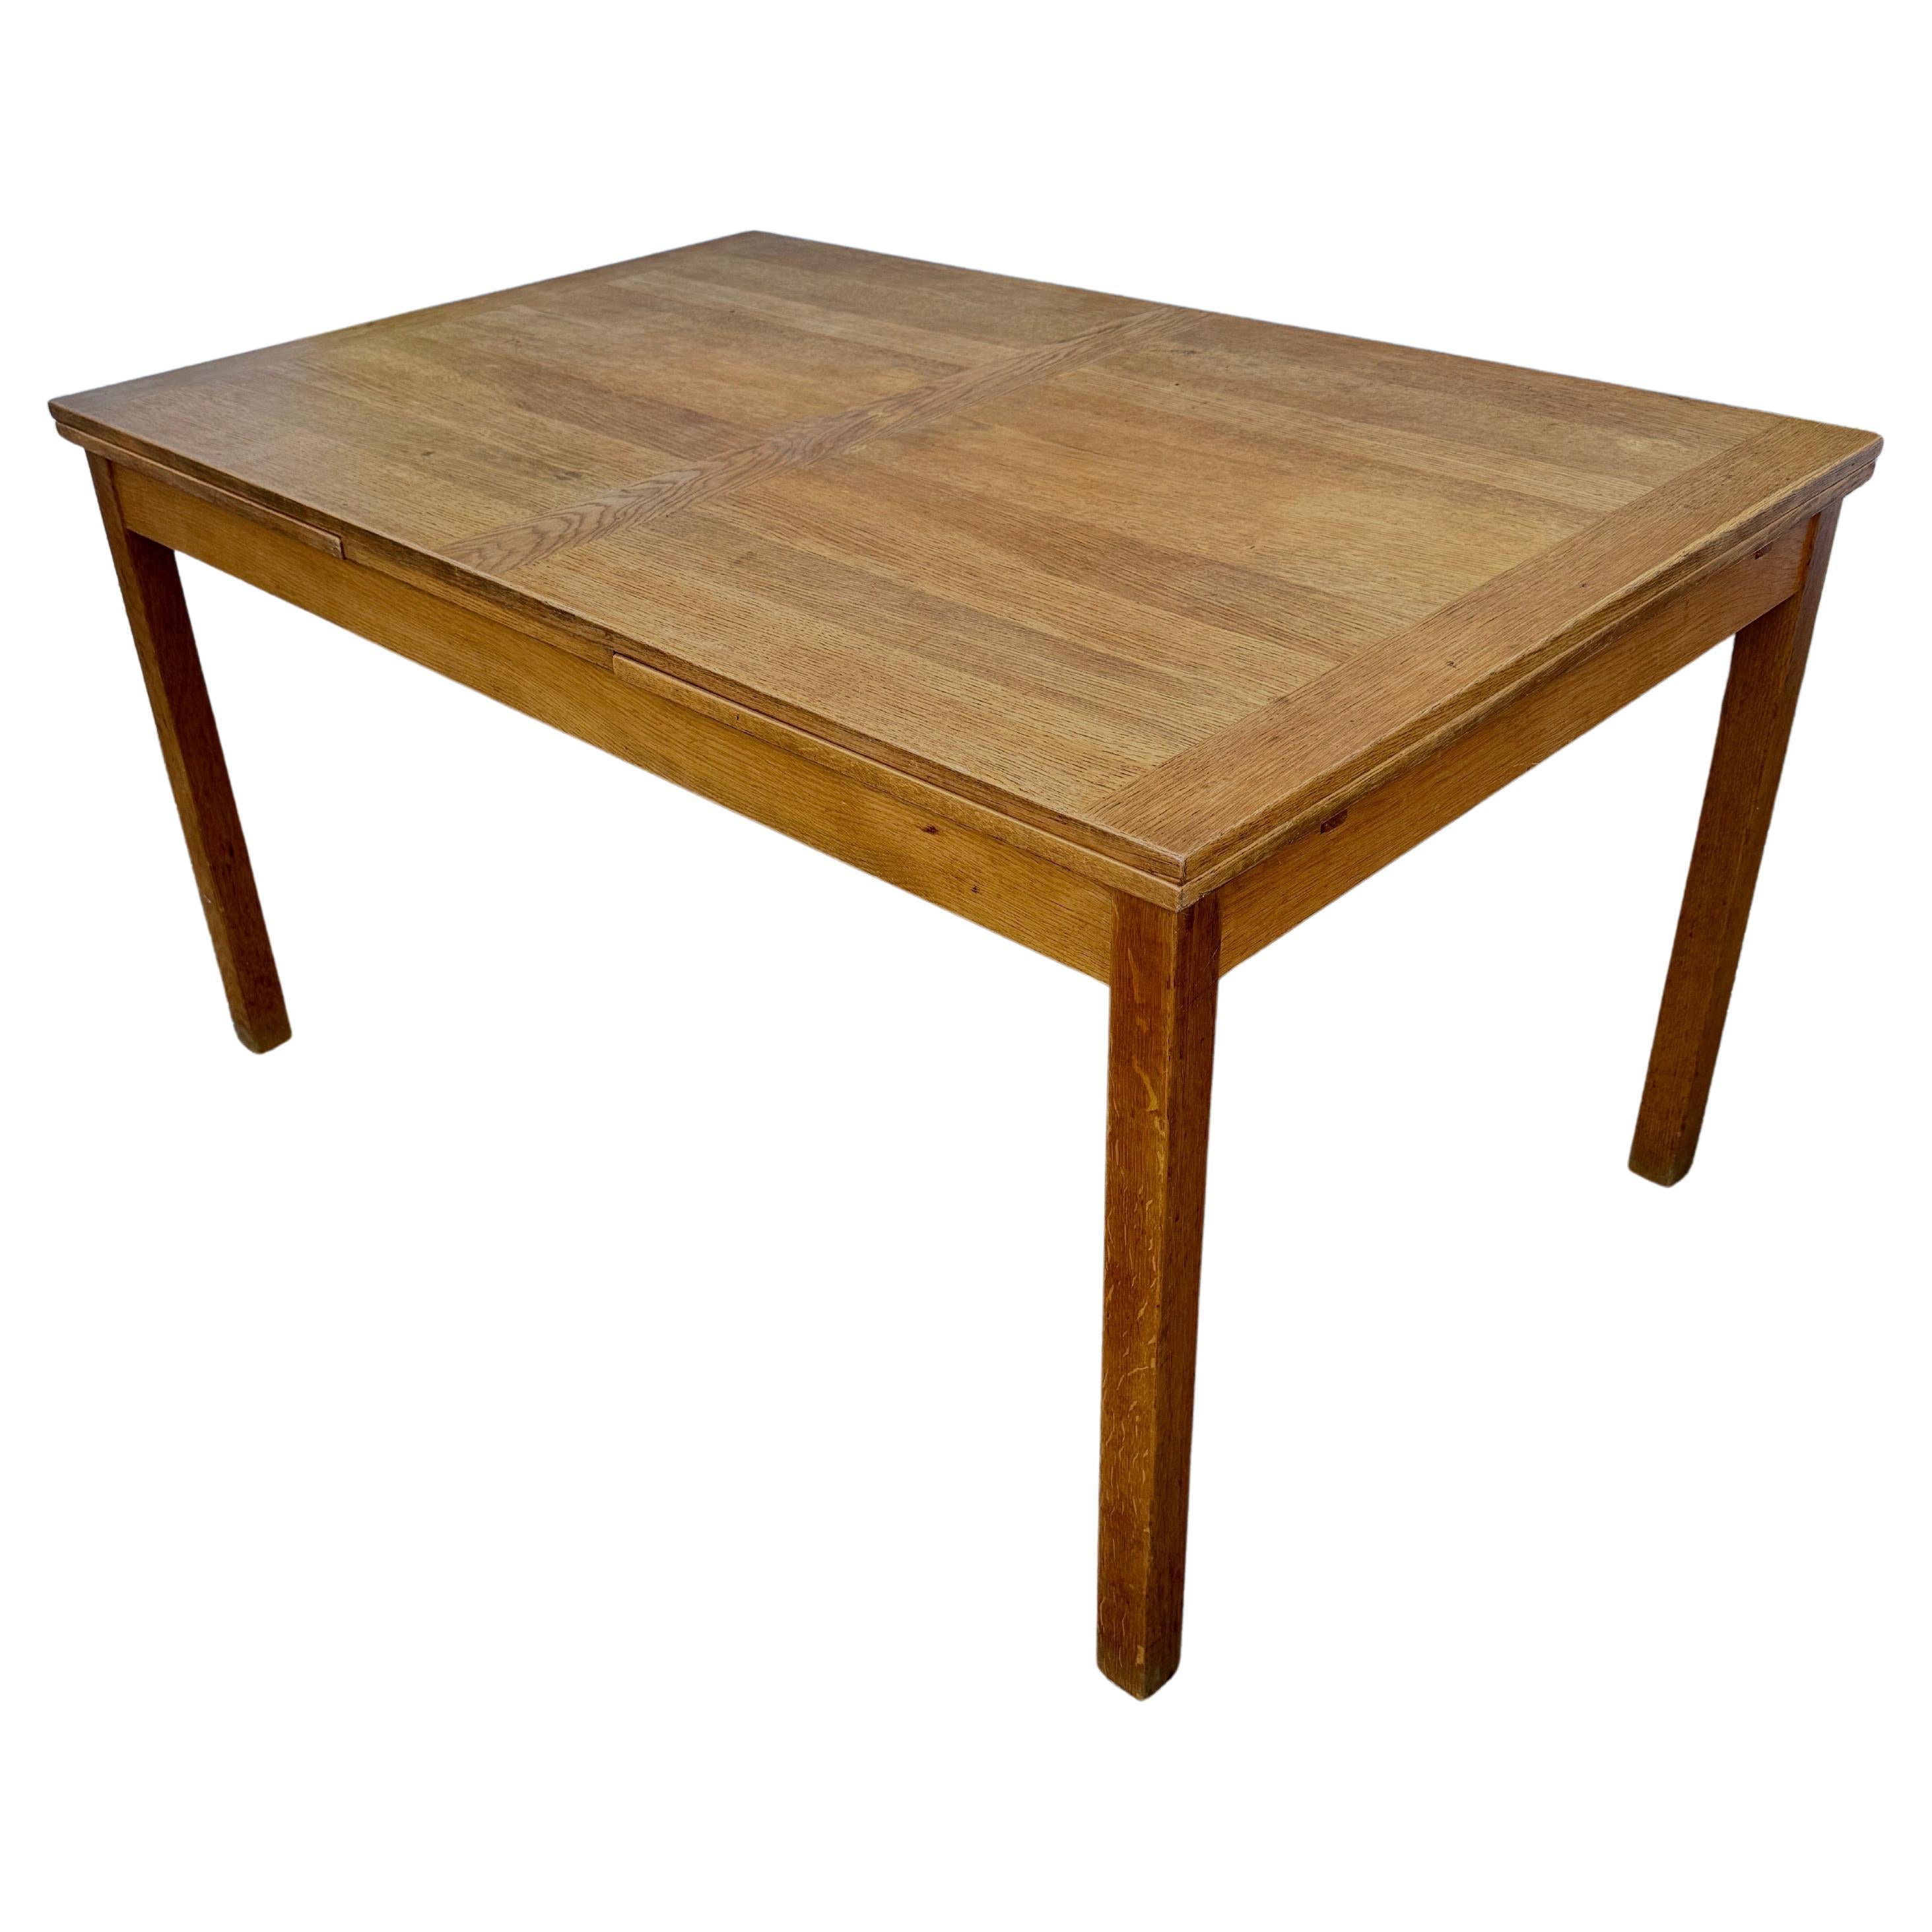 Danish Mid-Century Modern Expandable Dining Table